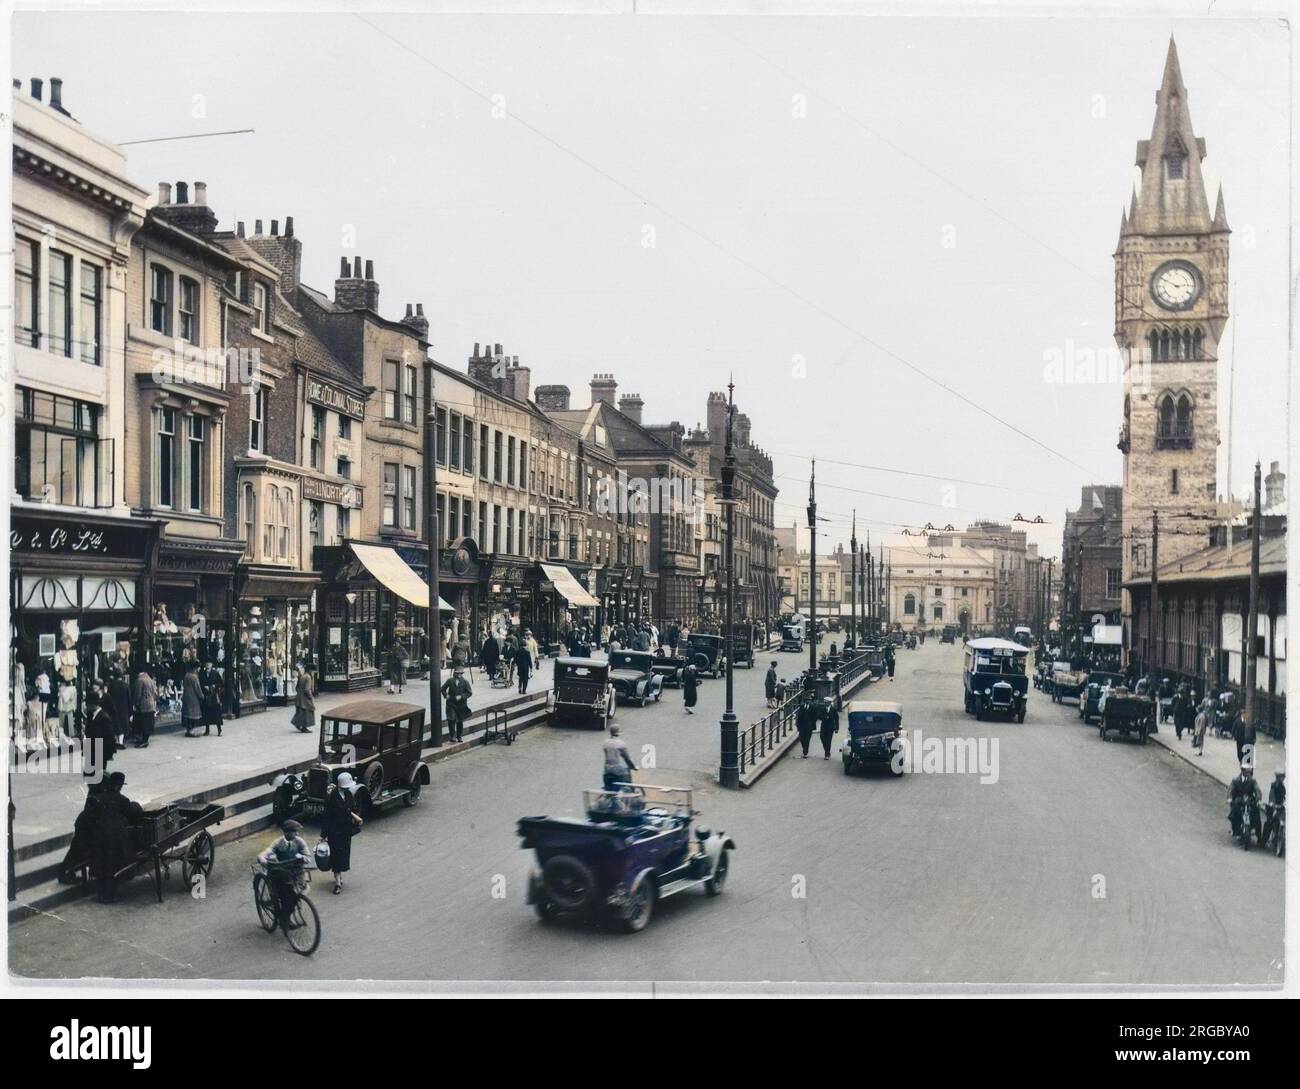 A view of High Row in Darlington, County Durham, showing a clock tower,traffic and shops. Stock Photo